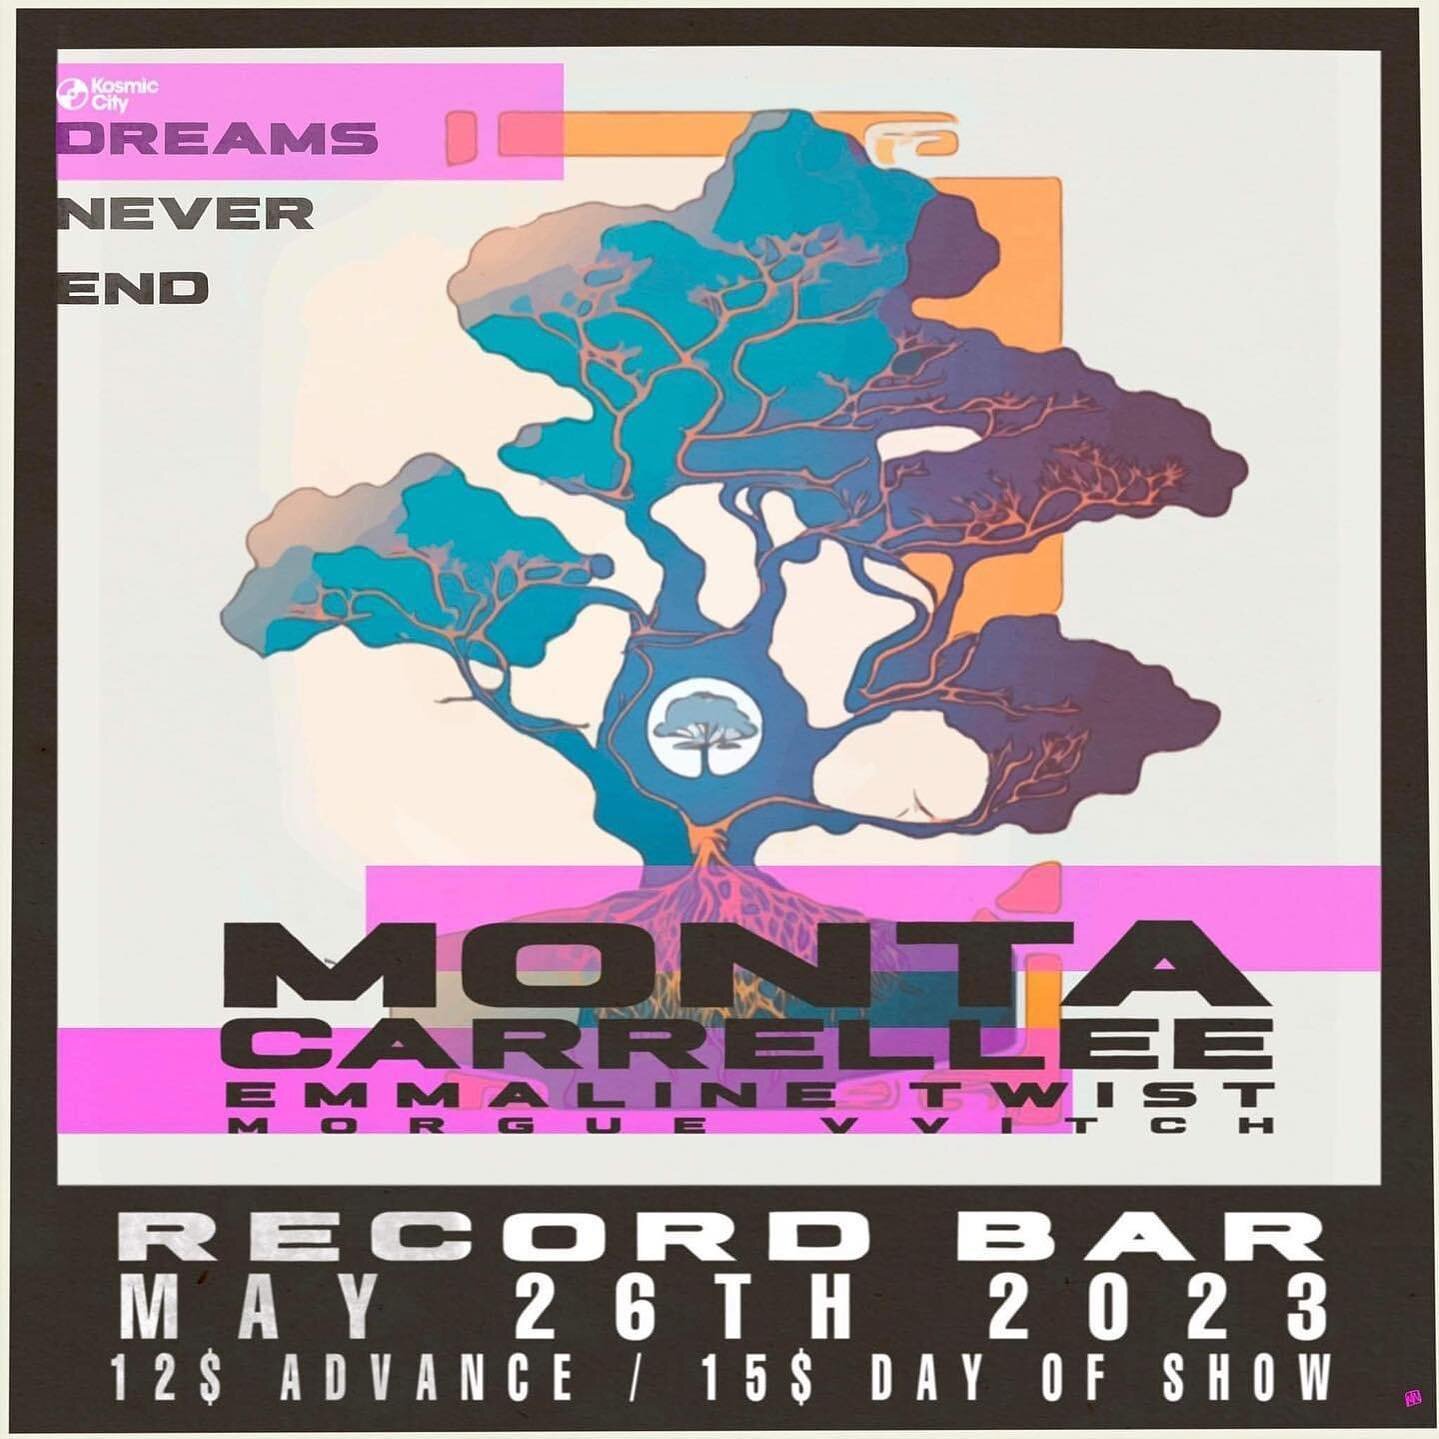 @monta.us is back on Friday! They have a new event at @recordbar called Dreams Never End and will be playing with @carrelleefree, @emmalinetwist, and @morguevvitch! Should be a great show